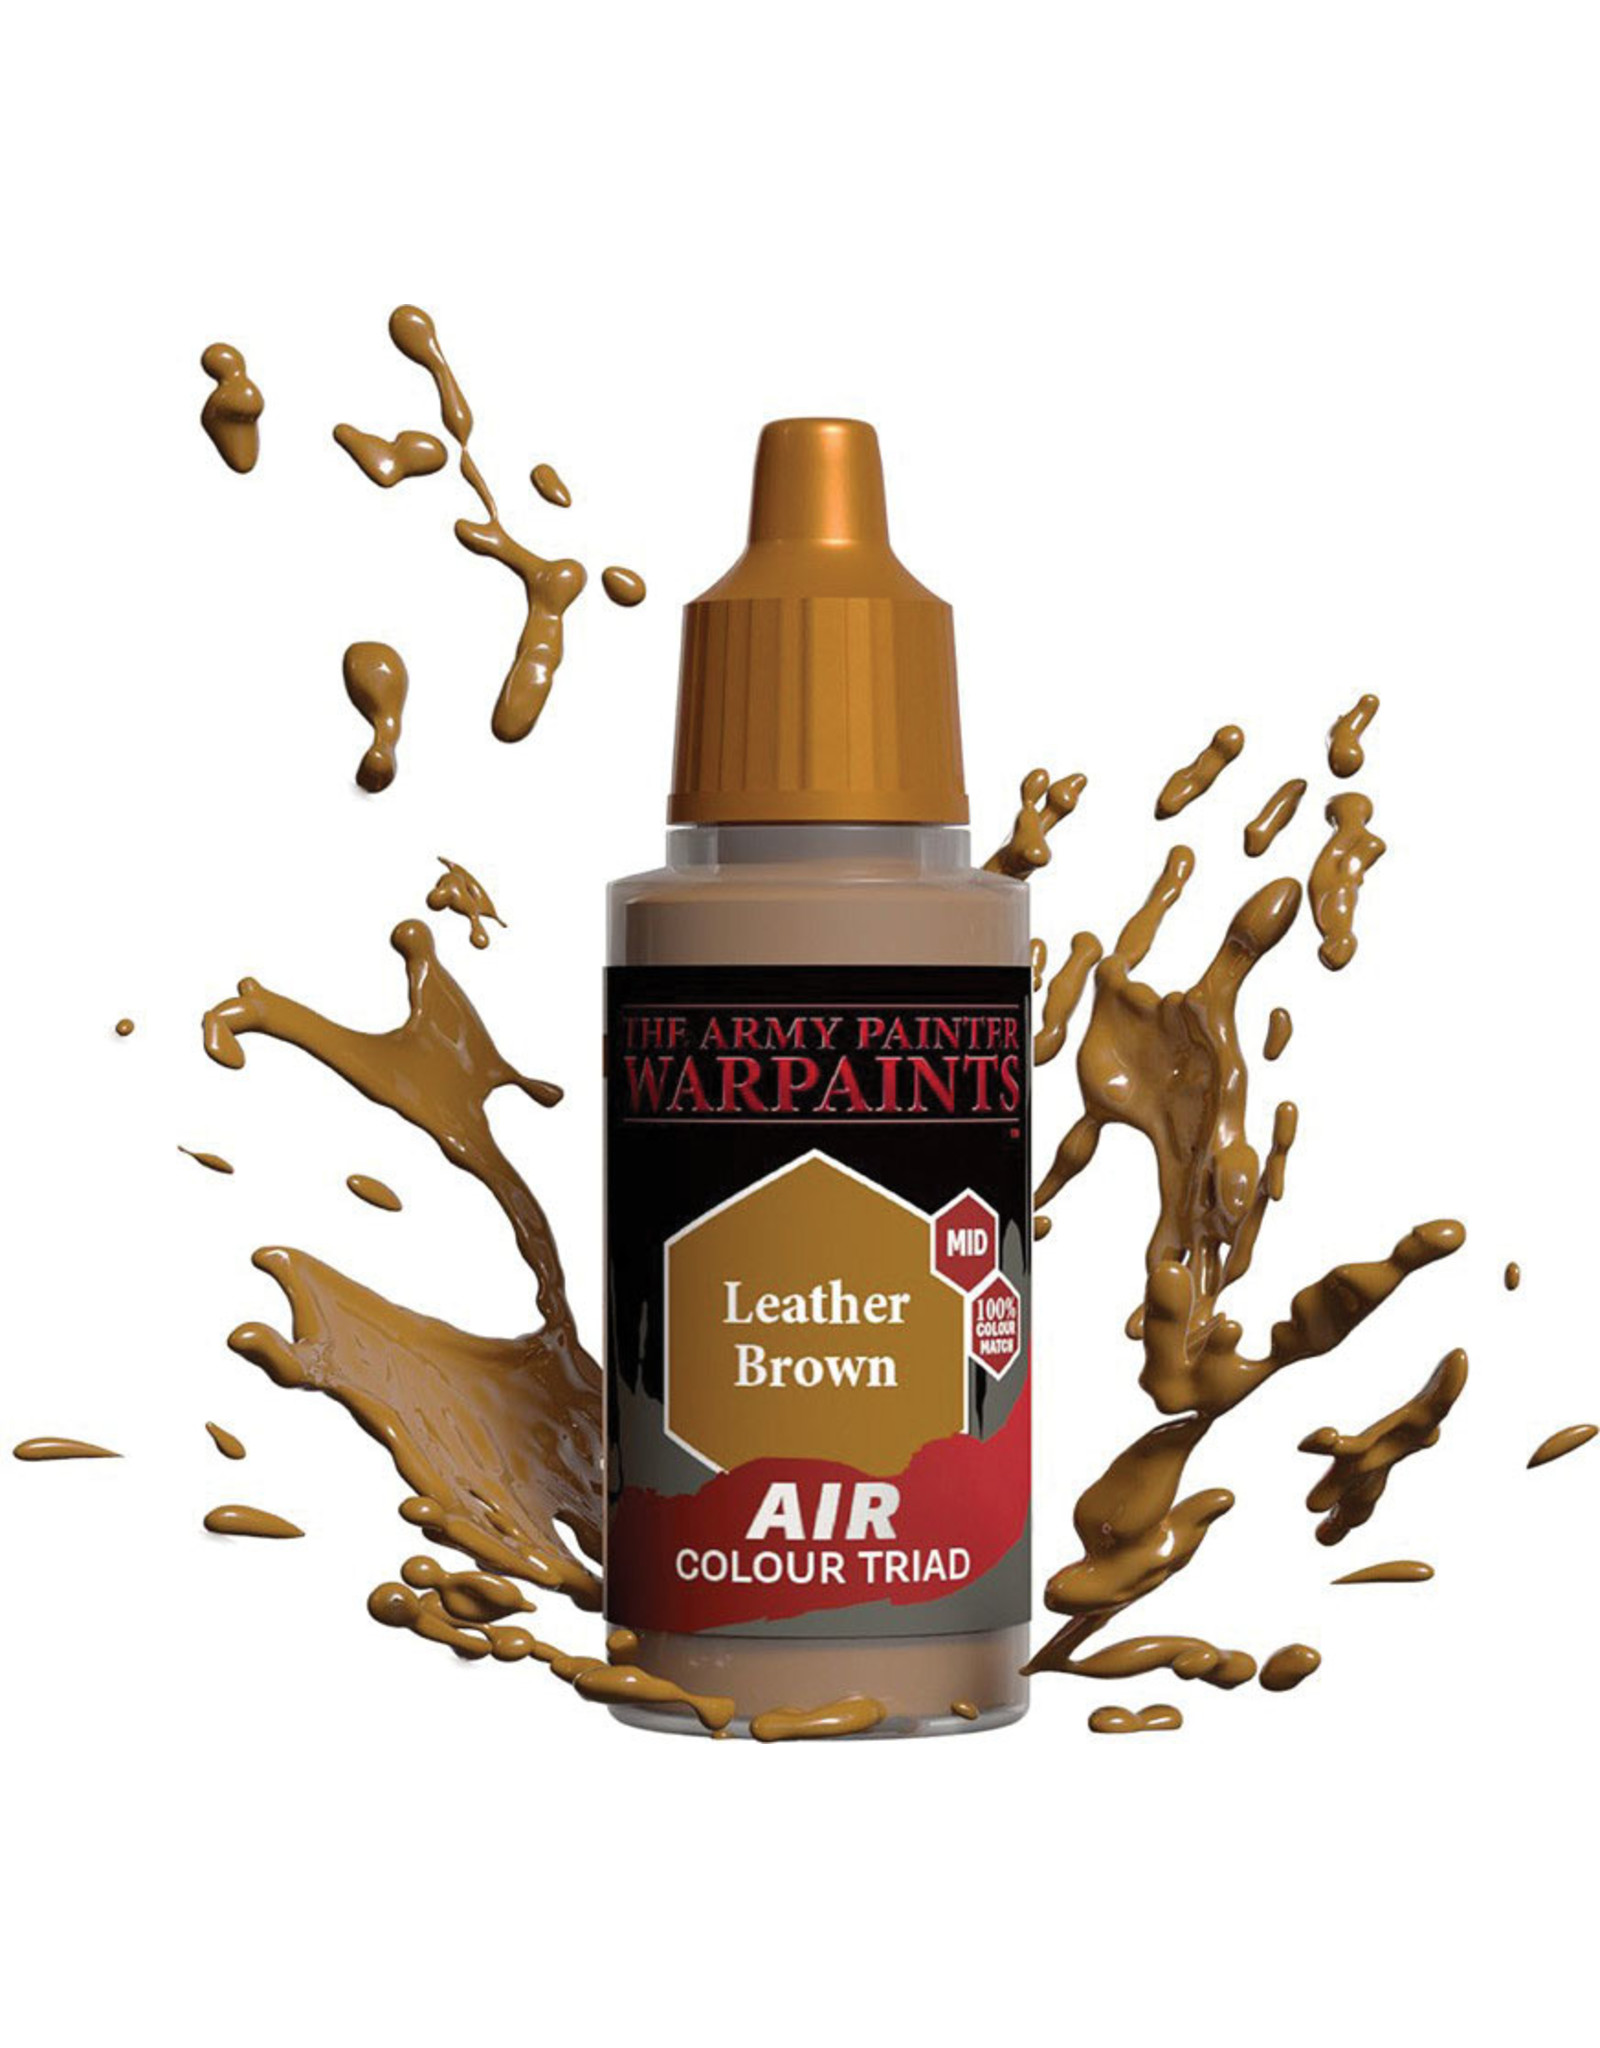 Army Painter Warpaint Air: Leather Brown, 18ml.